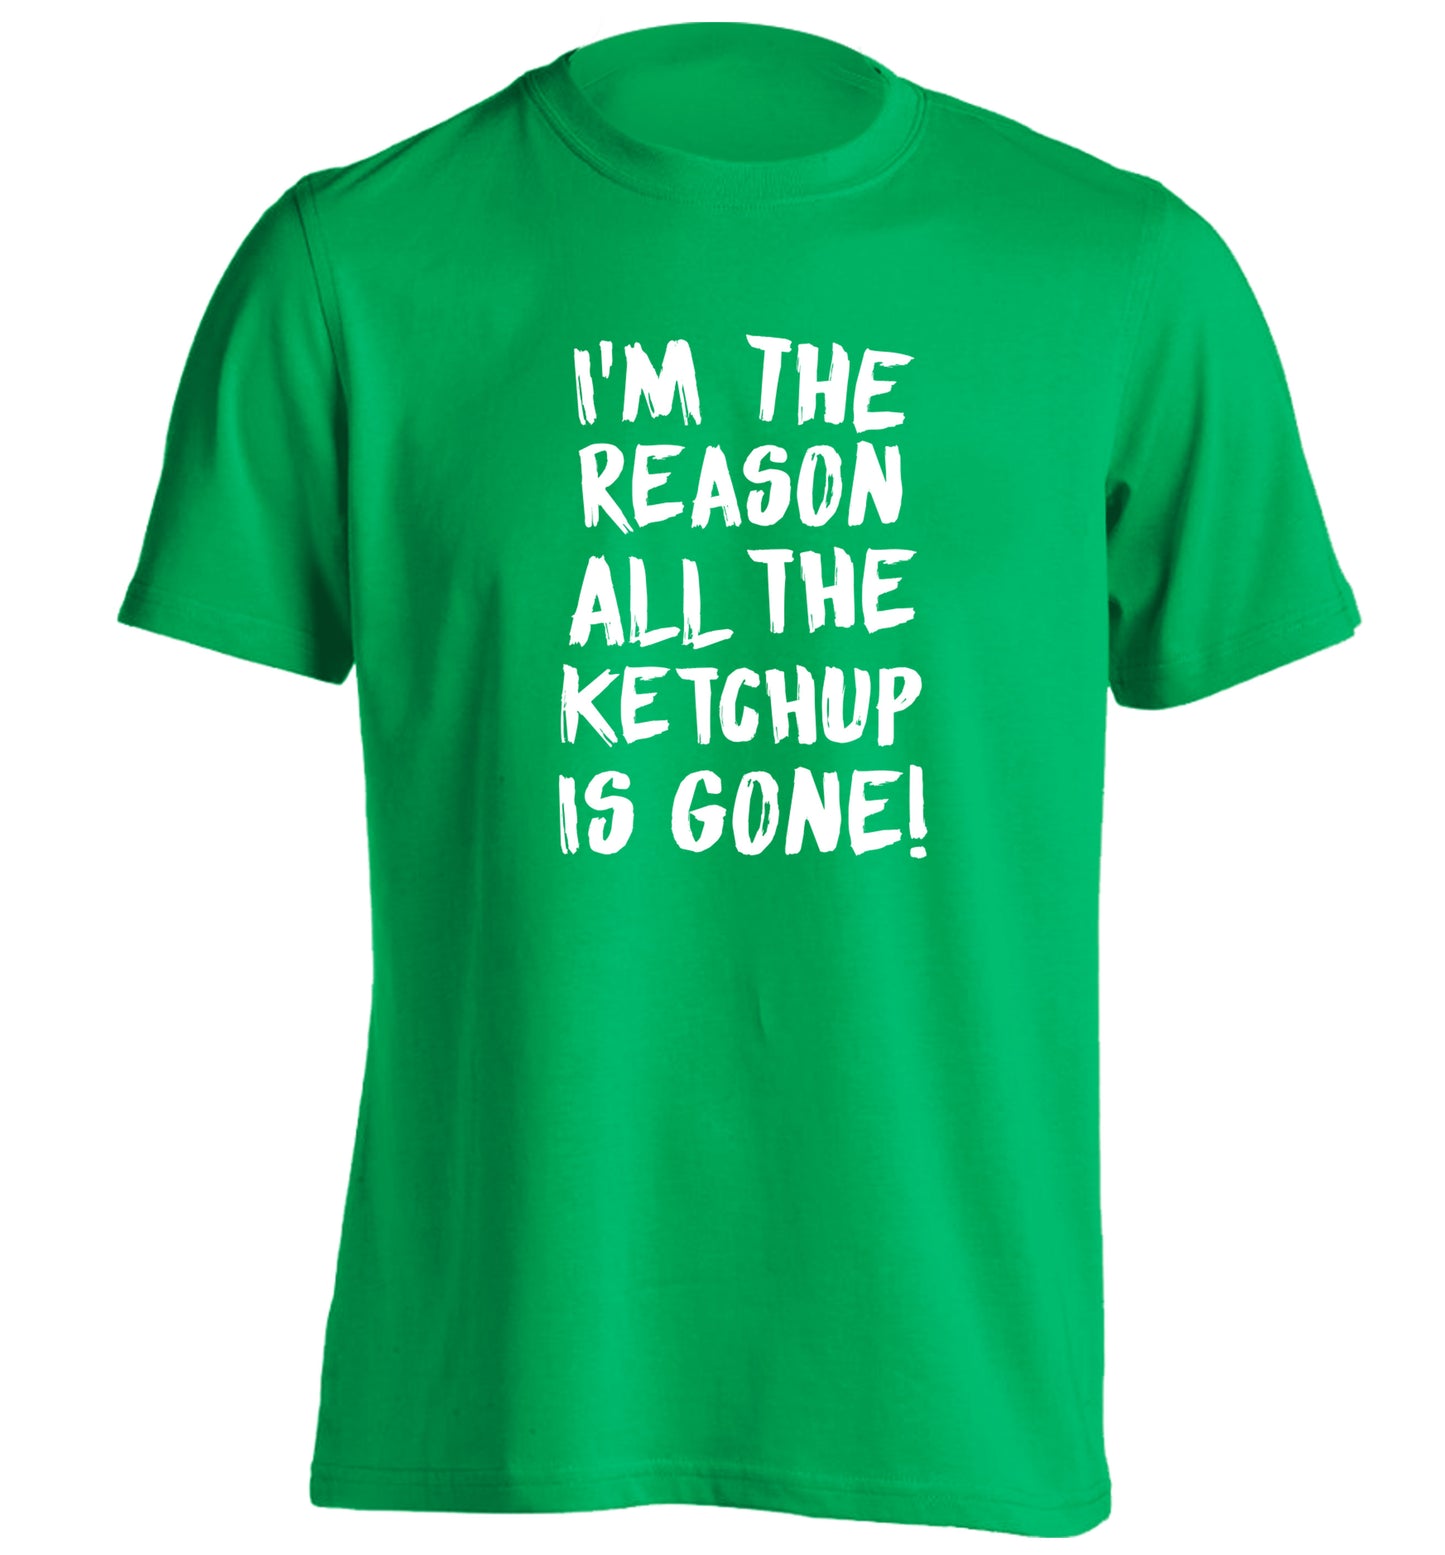 I'm the reason why all the ketchup is gone adults unisex green Tshirt 2XL